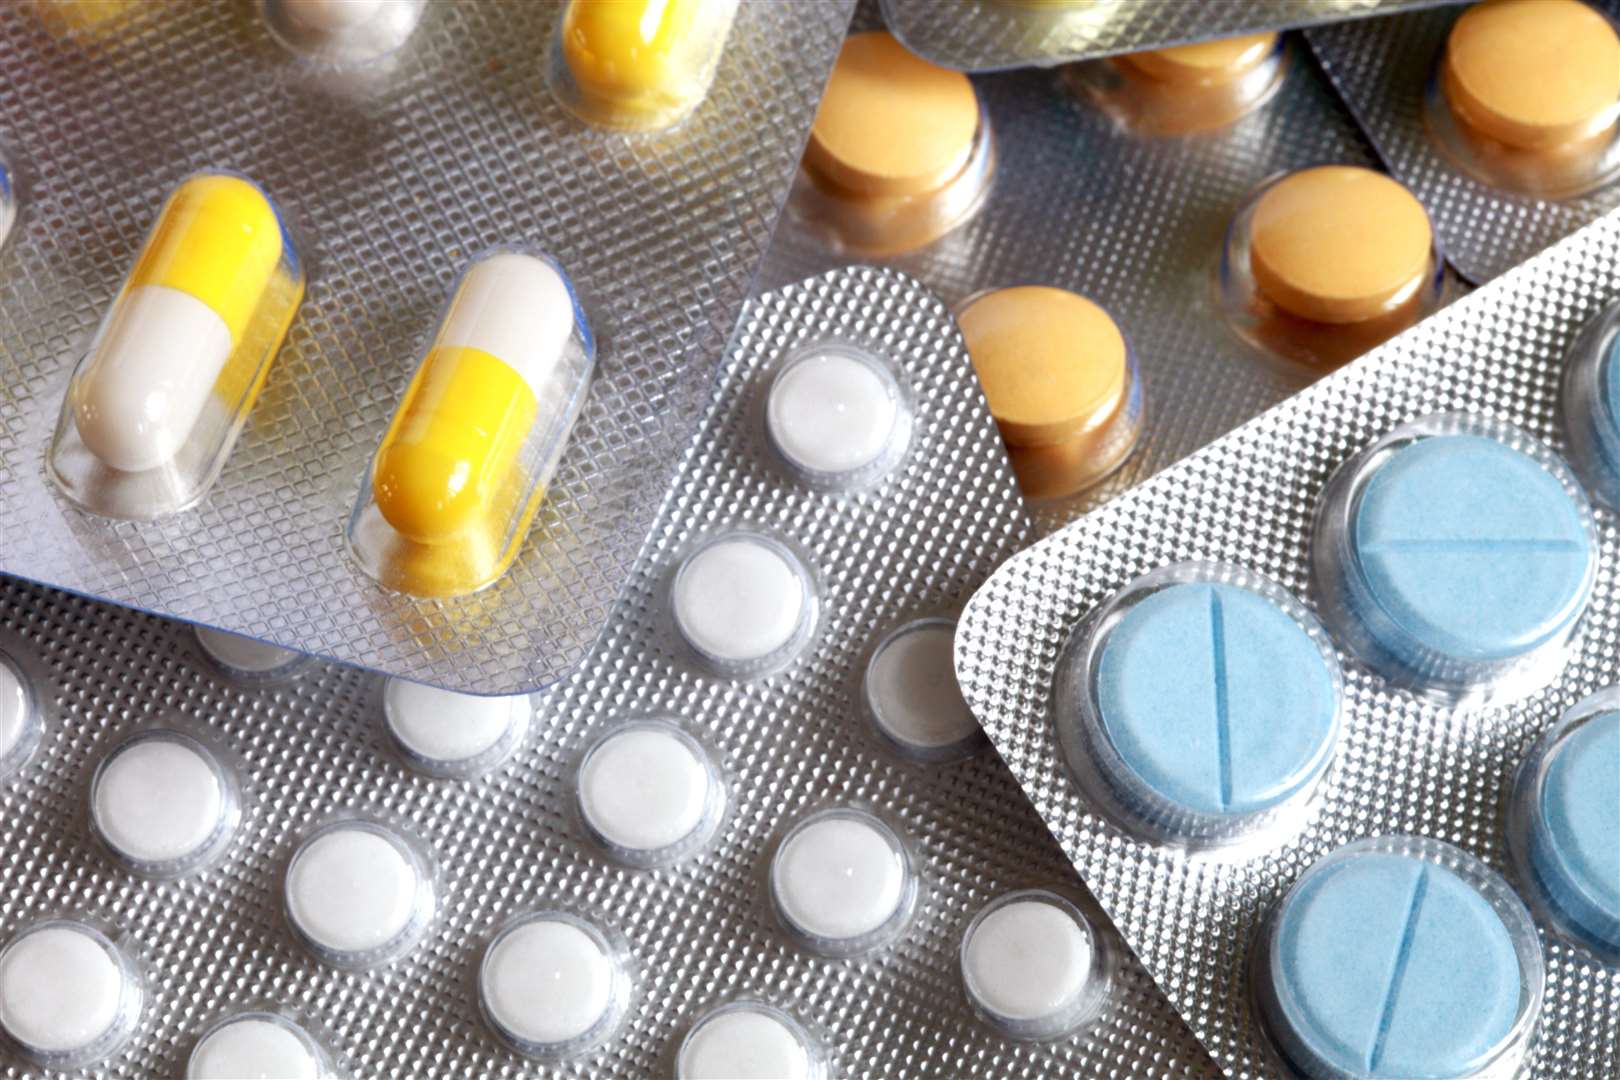 Prescriptions in Wales, Scotland and Northern Ireland are free. Image: iStock.